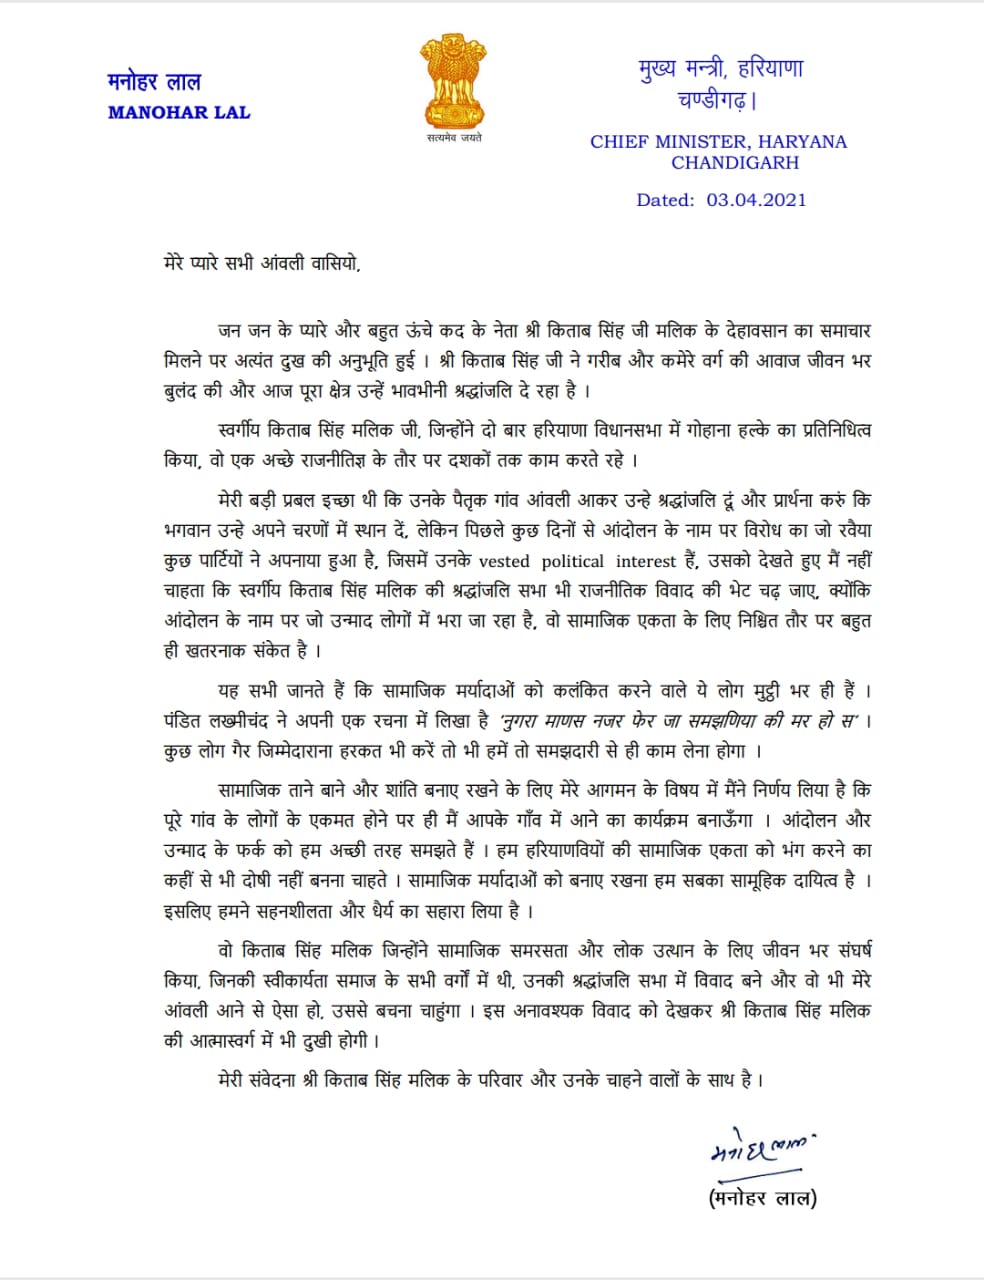 CM manohar lal wrote a letter to the public